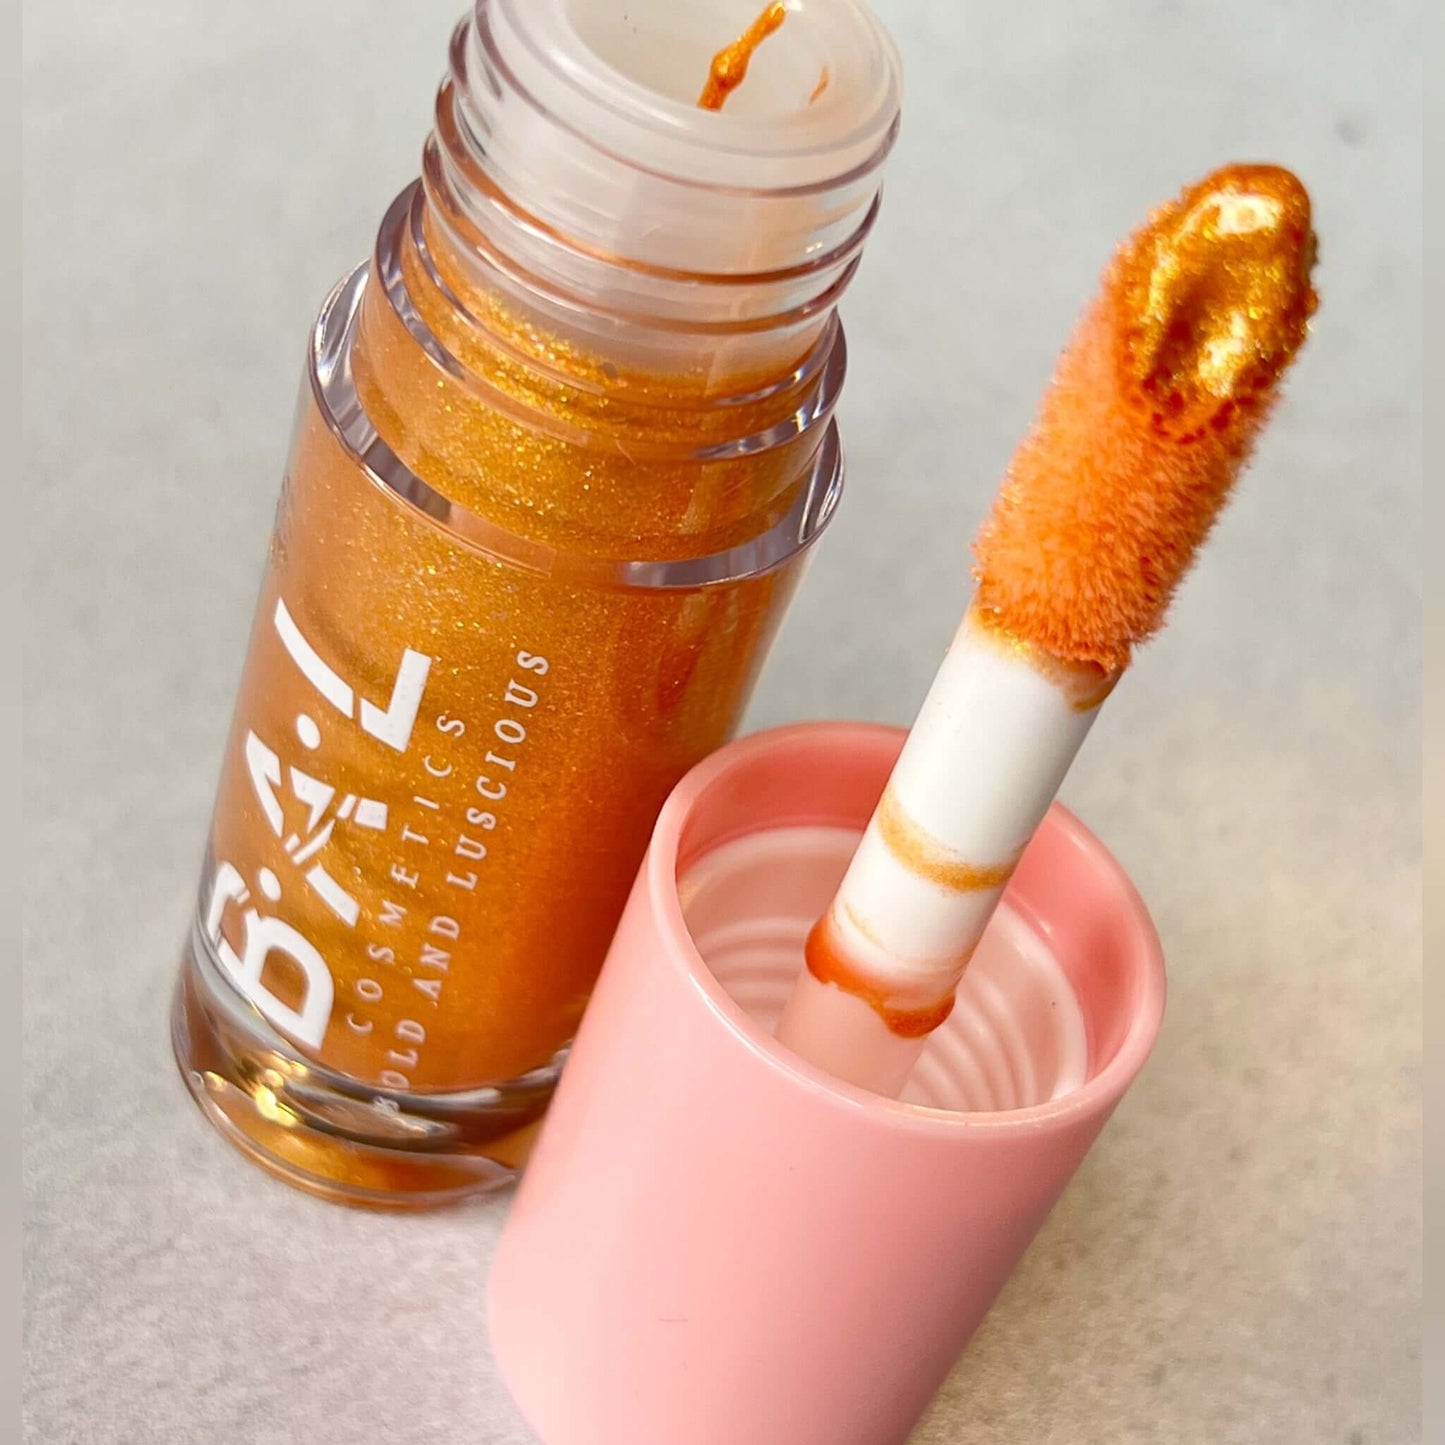 Bold and Luscious Cosmetics Lip Gloss in color Champagne. In the top left is the bottle of the gloss without the lid. the applicator is standing on its top next to the gloss. You can see the golden color glitter gloss and its rich color. 